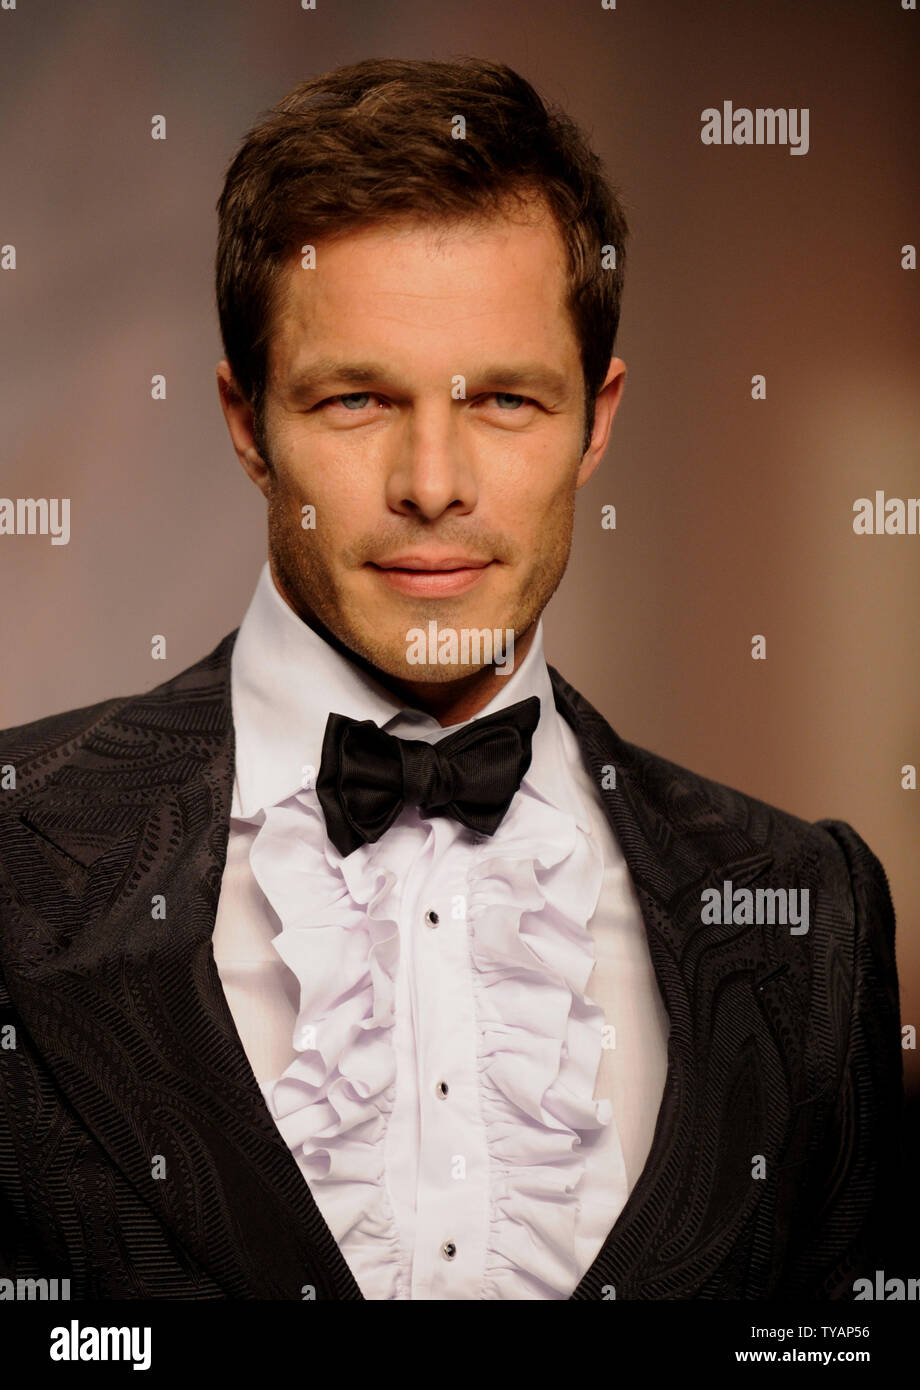 British model Paul Sculfor attends 'Naomi Campbell's Fashion For Relief' show at London Fashion Week in London on September 17, 2008.  (UPI Photo/Rune Hellestad) Stock Photo